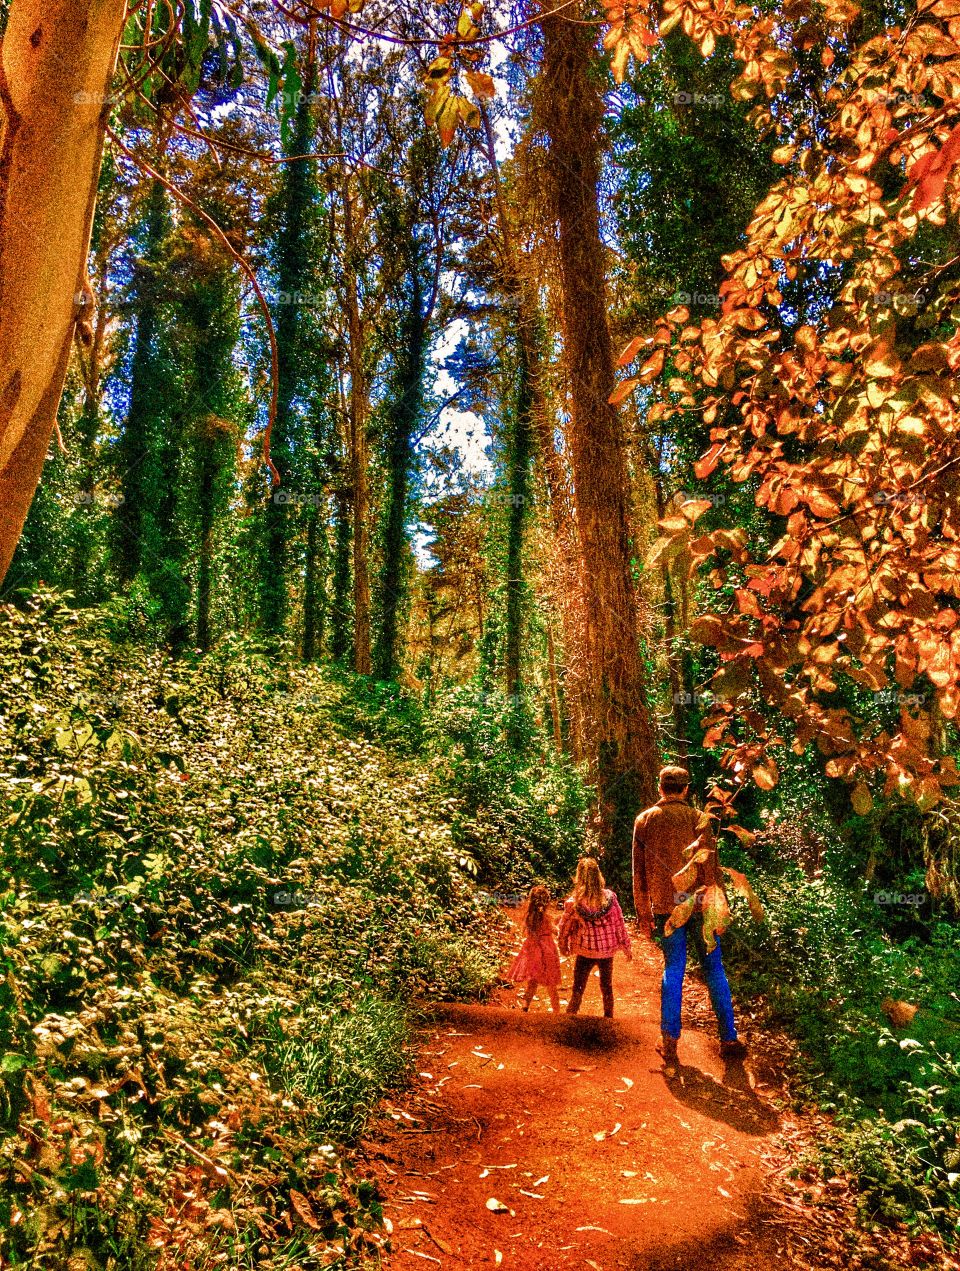 Autumn is here! Interior Greenbelt of San Francisco with father and daughters on path